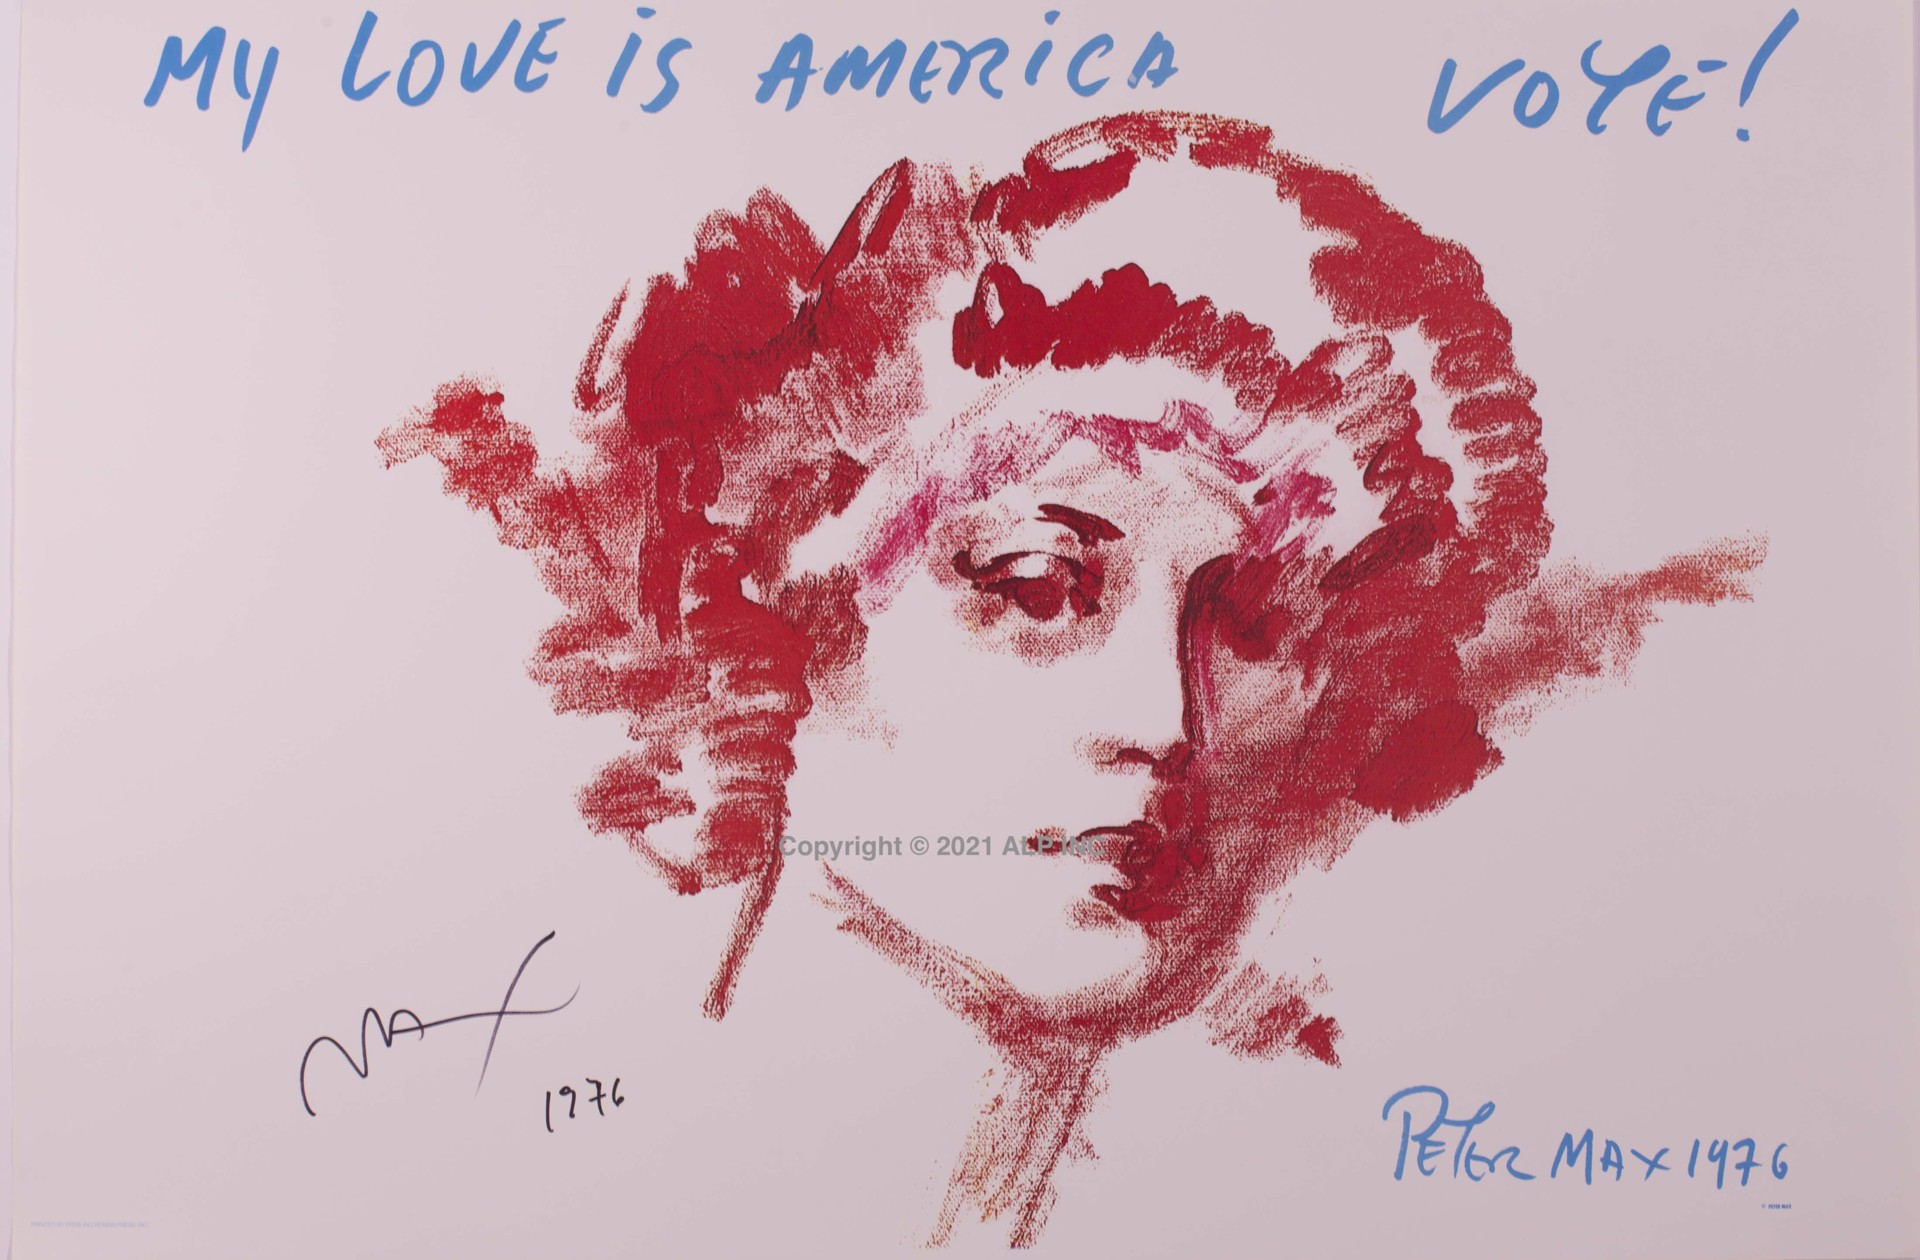 My Love is America - Vote by Peter Max